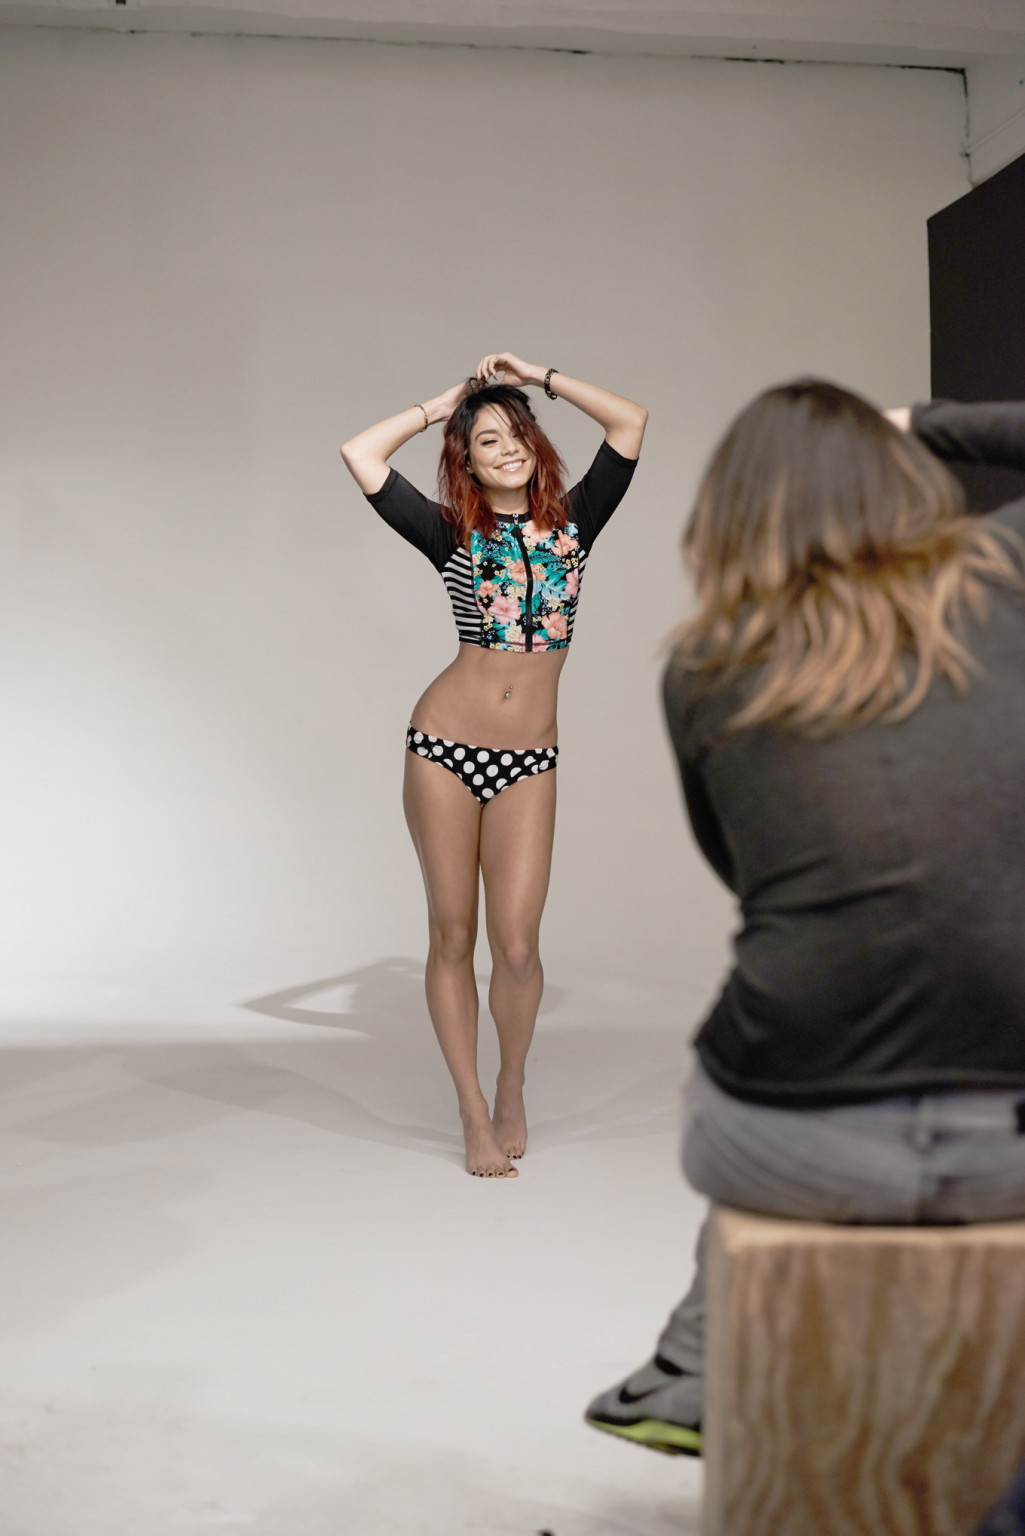 Vanessa Hudgens wearing skimpy undies and outfit for Bongo Spring 2015 Campaign  #75174005